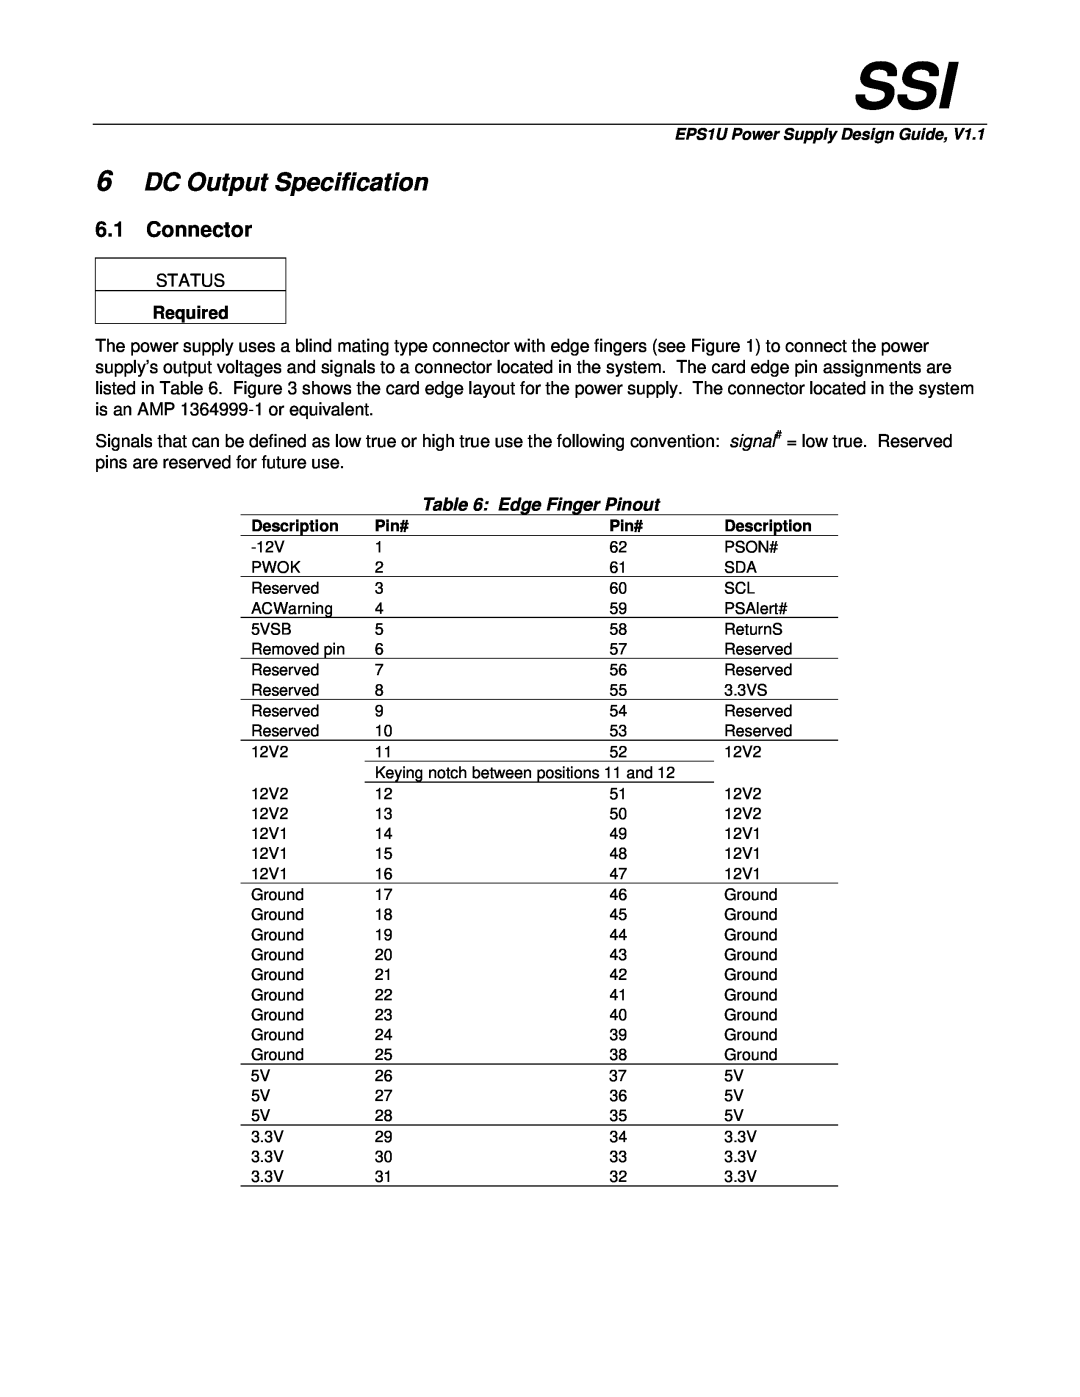 Intel EPS1U manual DC Output Specification, Connector, Edge Finger Pinout 